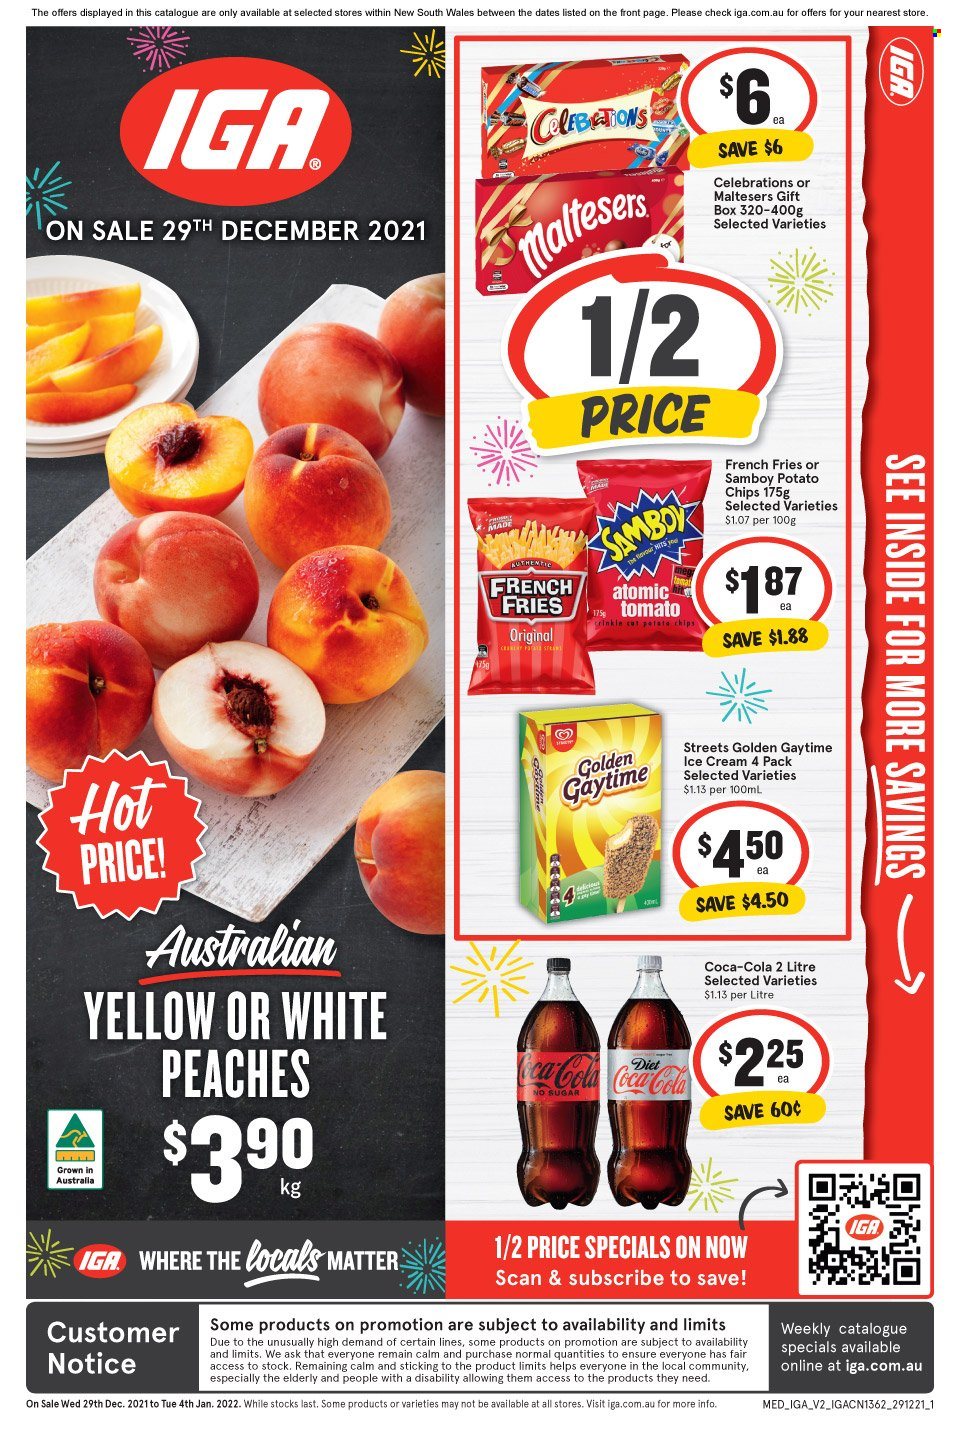 thumbnail - IGA Catalogue - 29 Dec 2021 - 4 Jan 2022 - Sales products - peaches, ice cream, Golden Gaytime, potato fries, french fries, Celebration, Maltesers, potato chips, chips, Coca-Cola, gift box. Page 1.